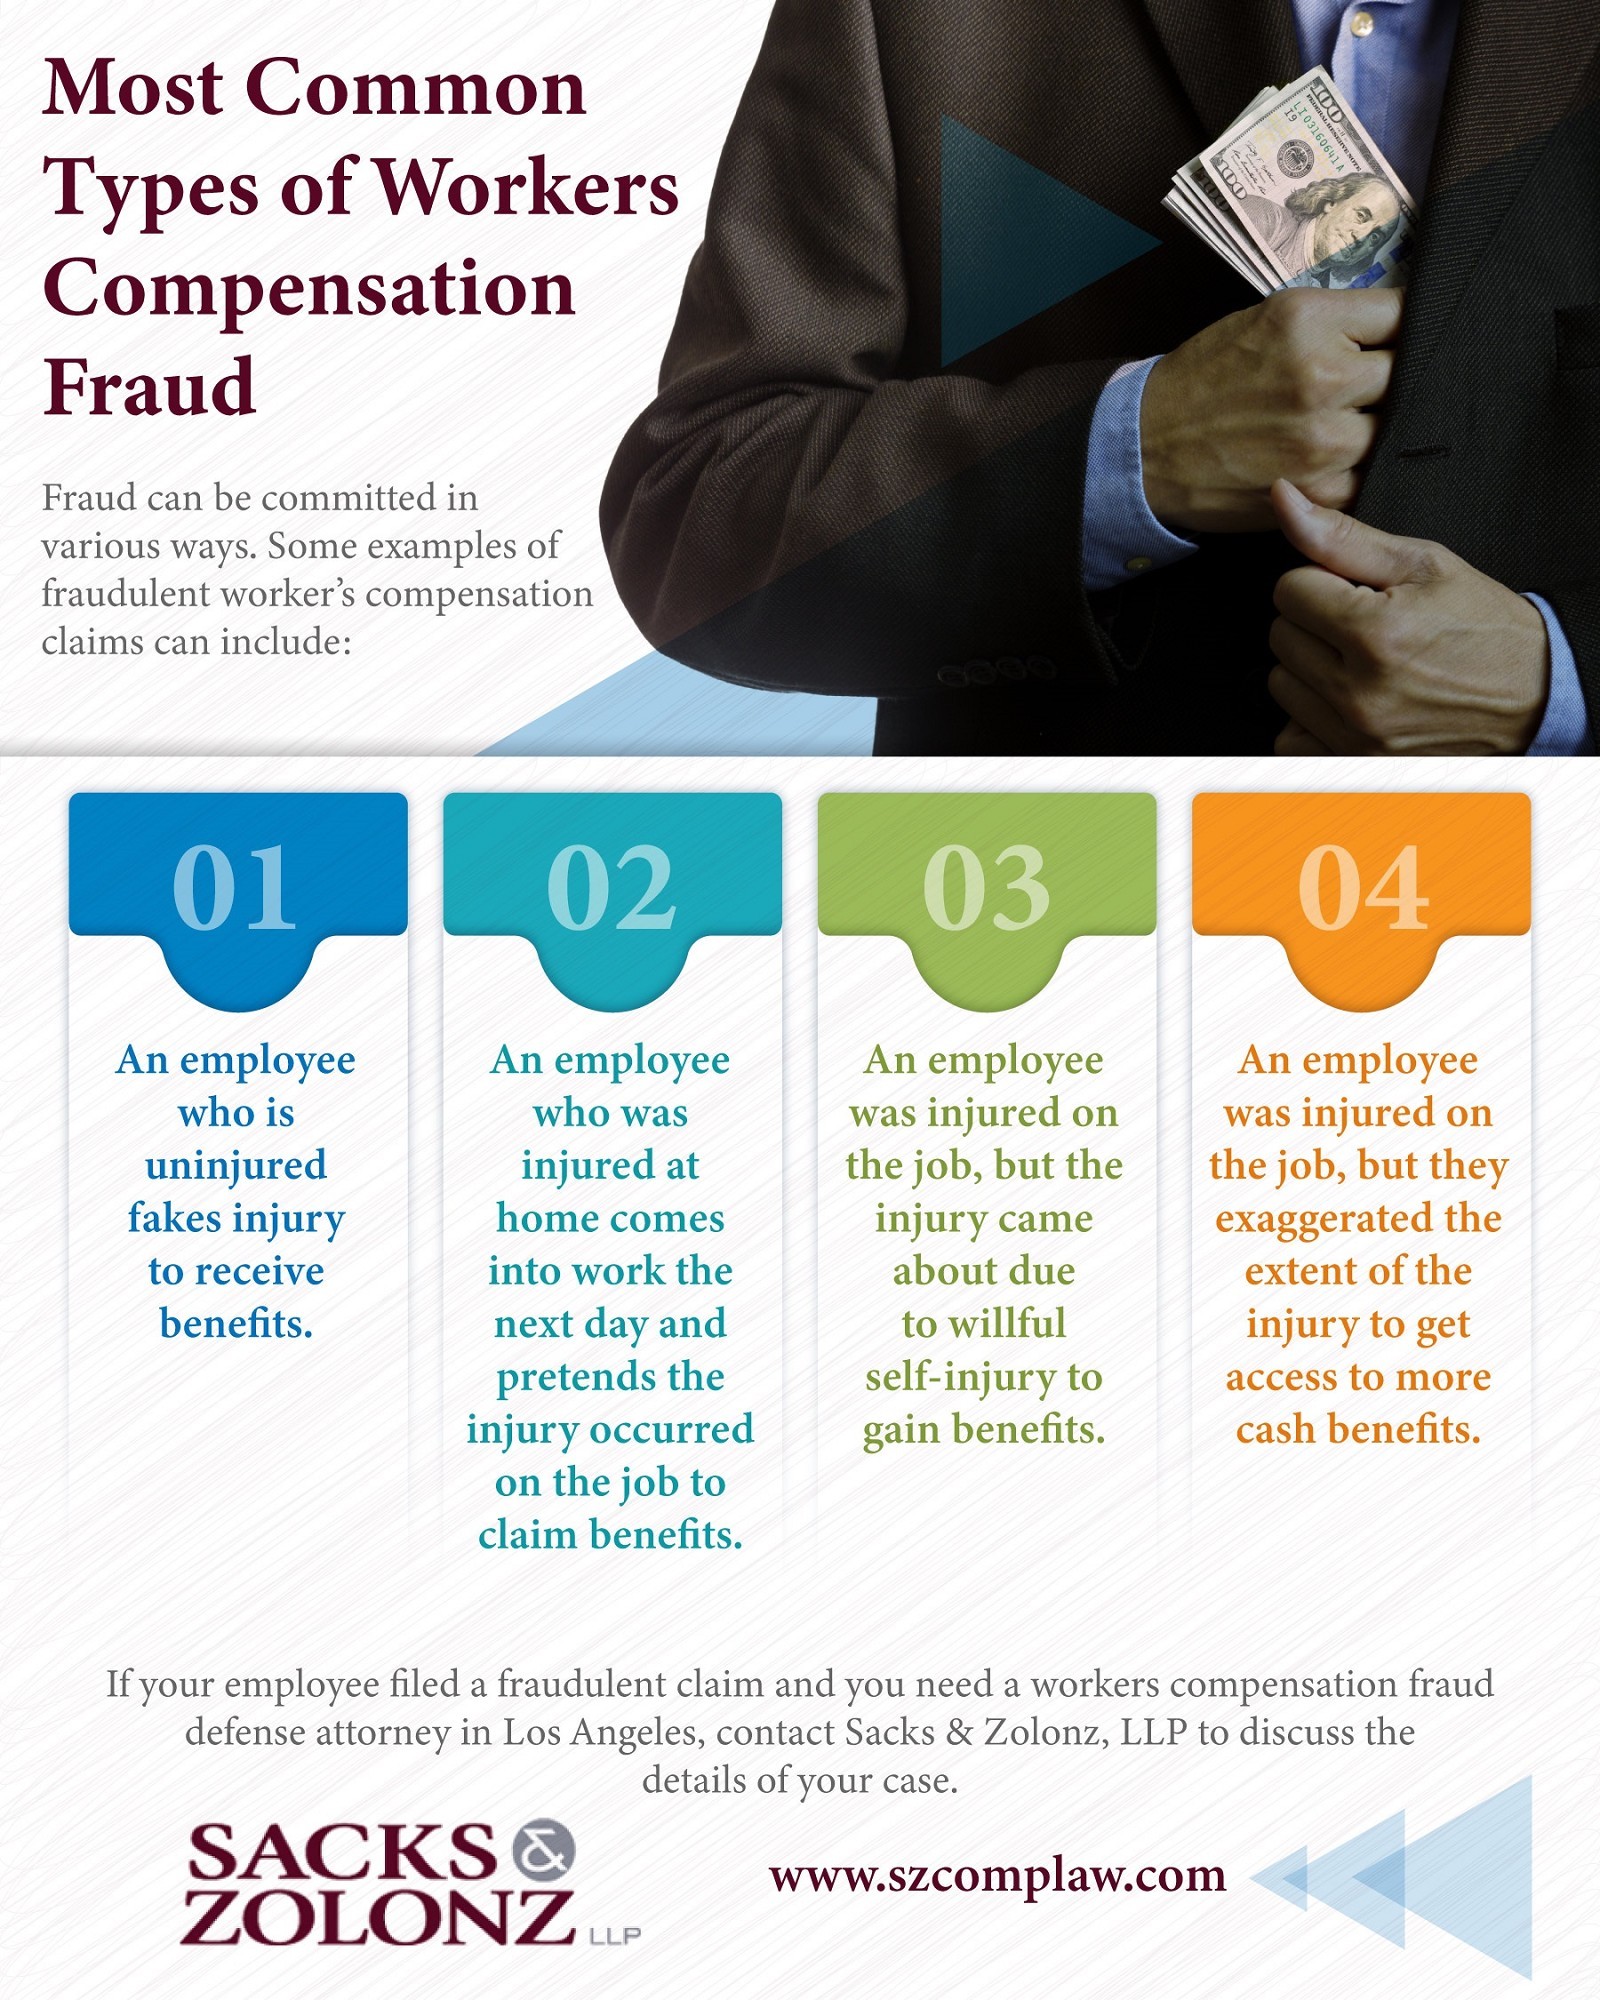 Most Common Types of Workers Compensation Fraud